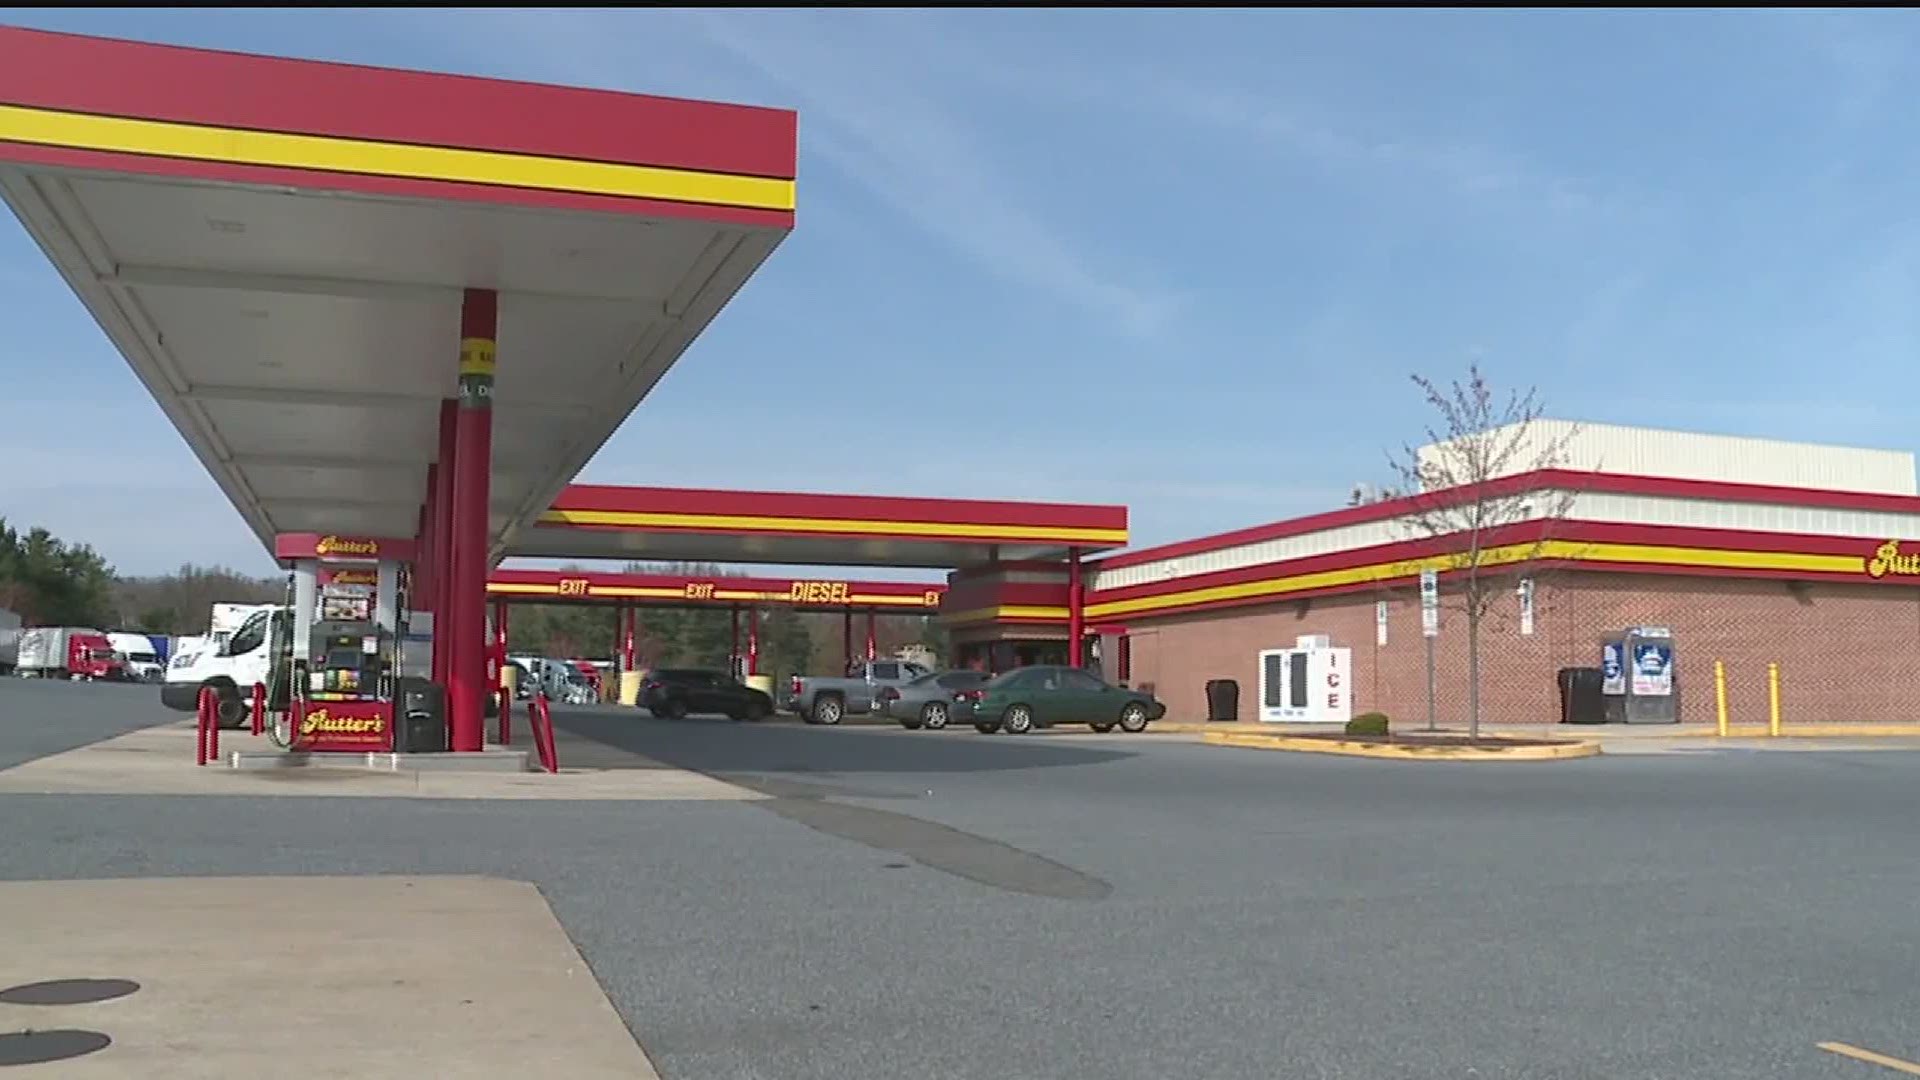 Dozens of Rutter’s locations impacted by data breach